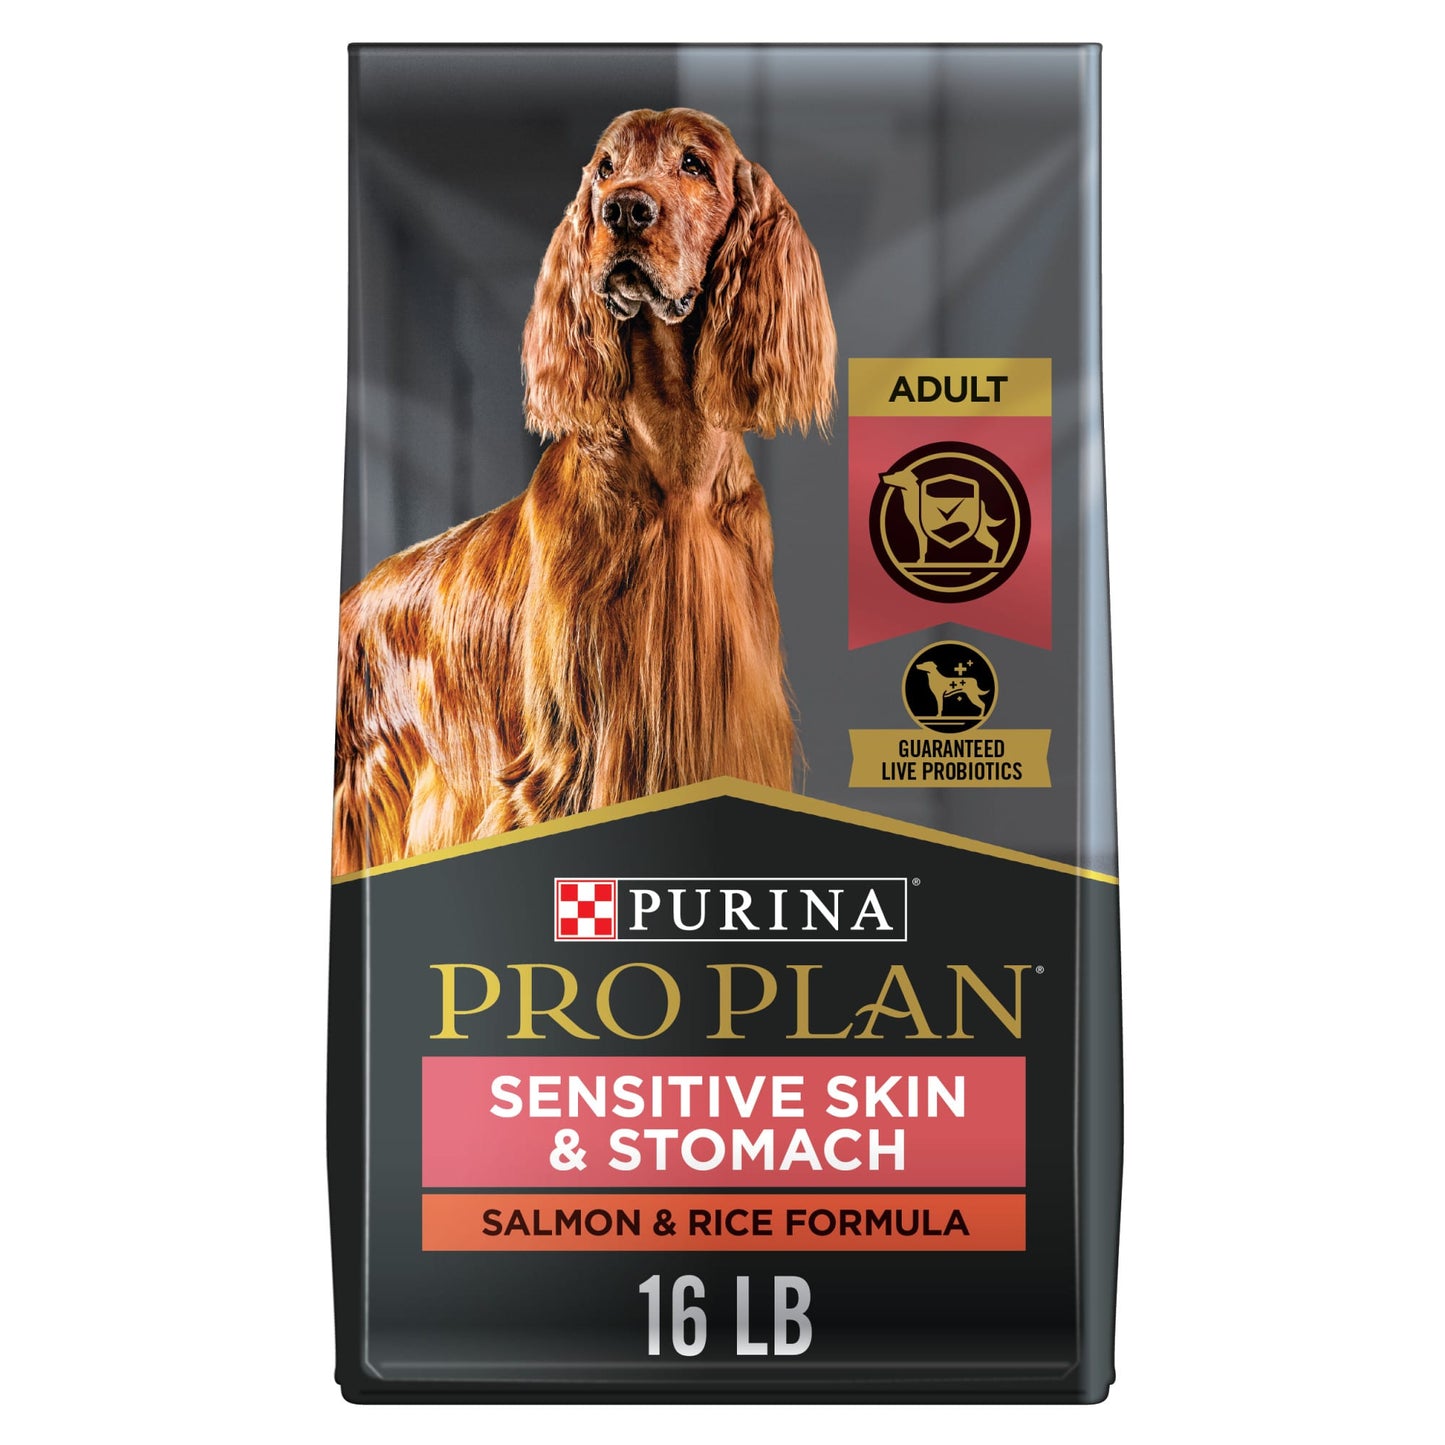 Purina Pro Plan Sensitive Skin and Stomach Dog Food With Probiotics for Dogs  Salmon & Rice Formula  16 lb. Bag